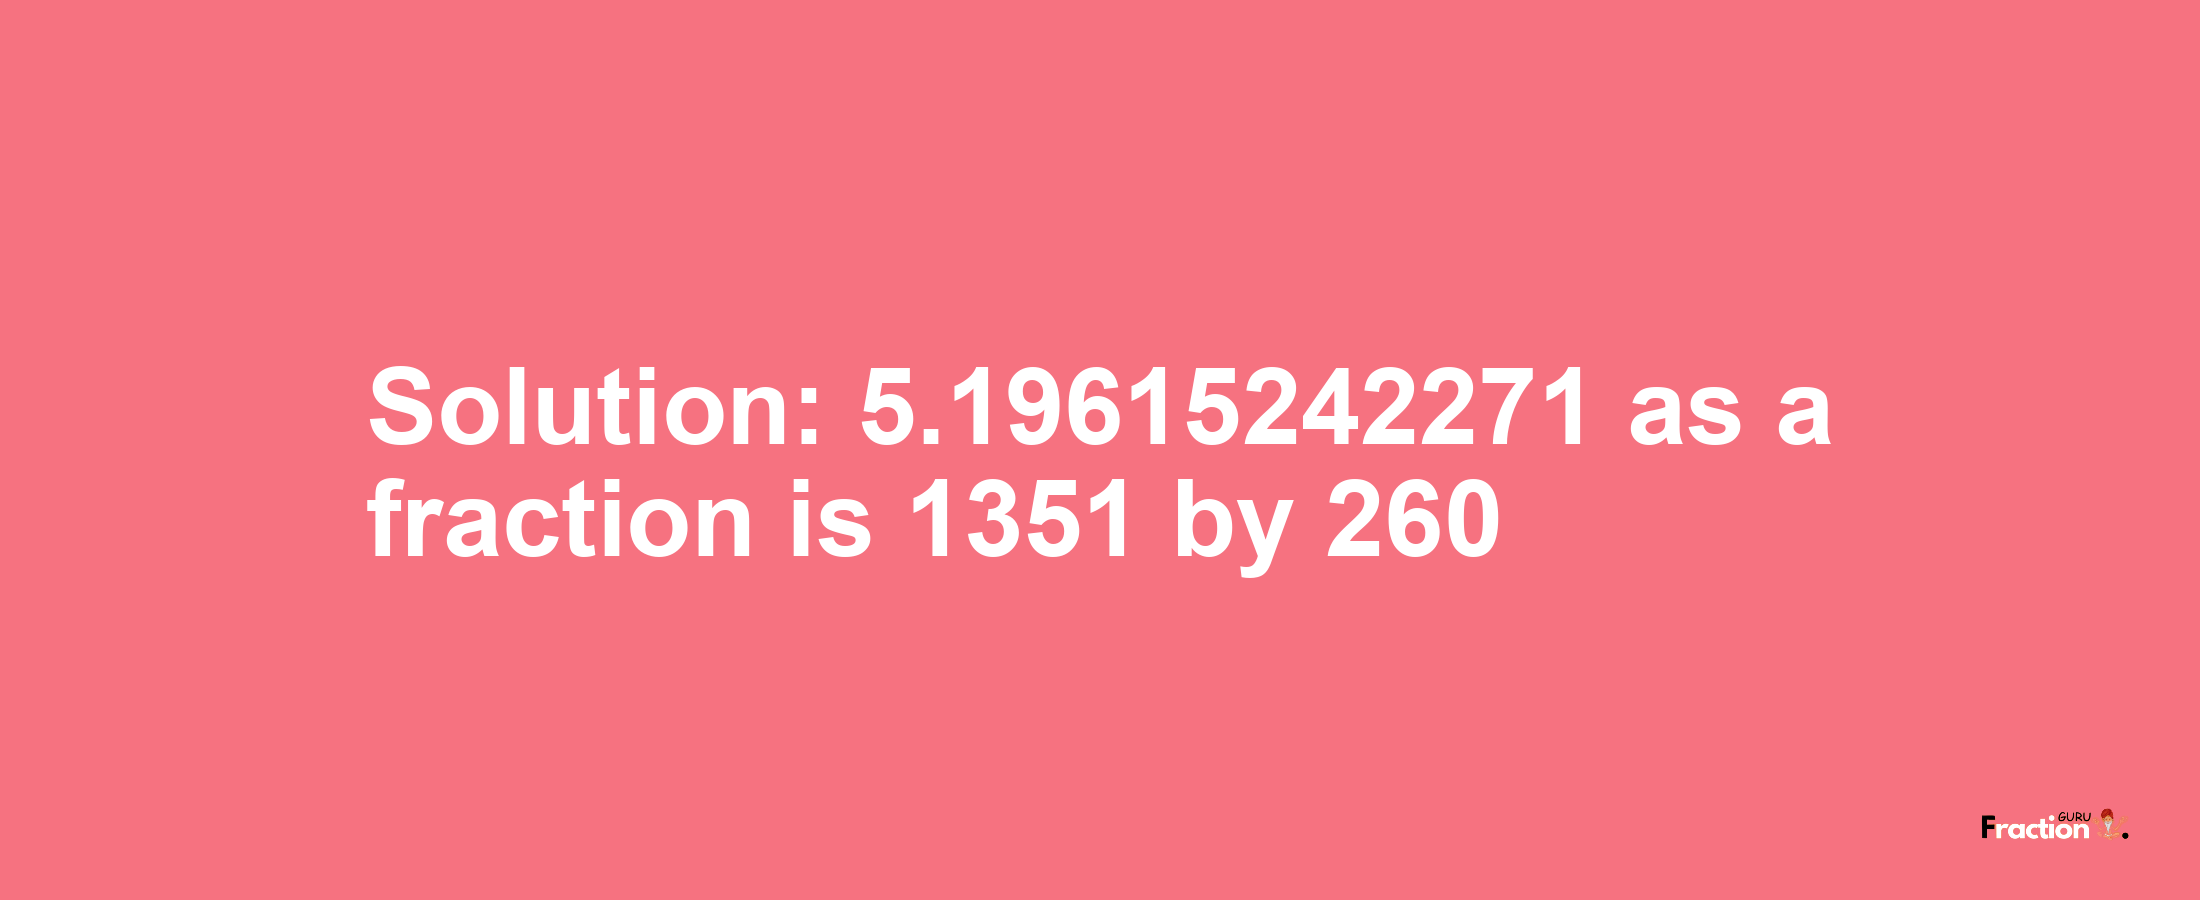 Solution:5.19615242271 as a fraction is 1351/260